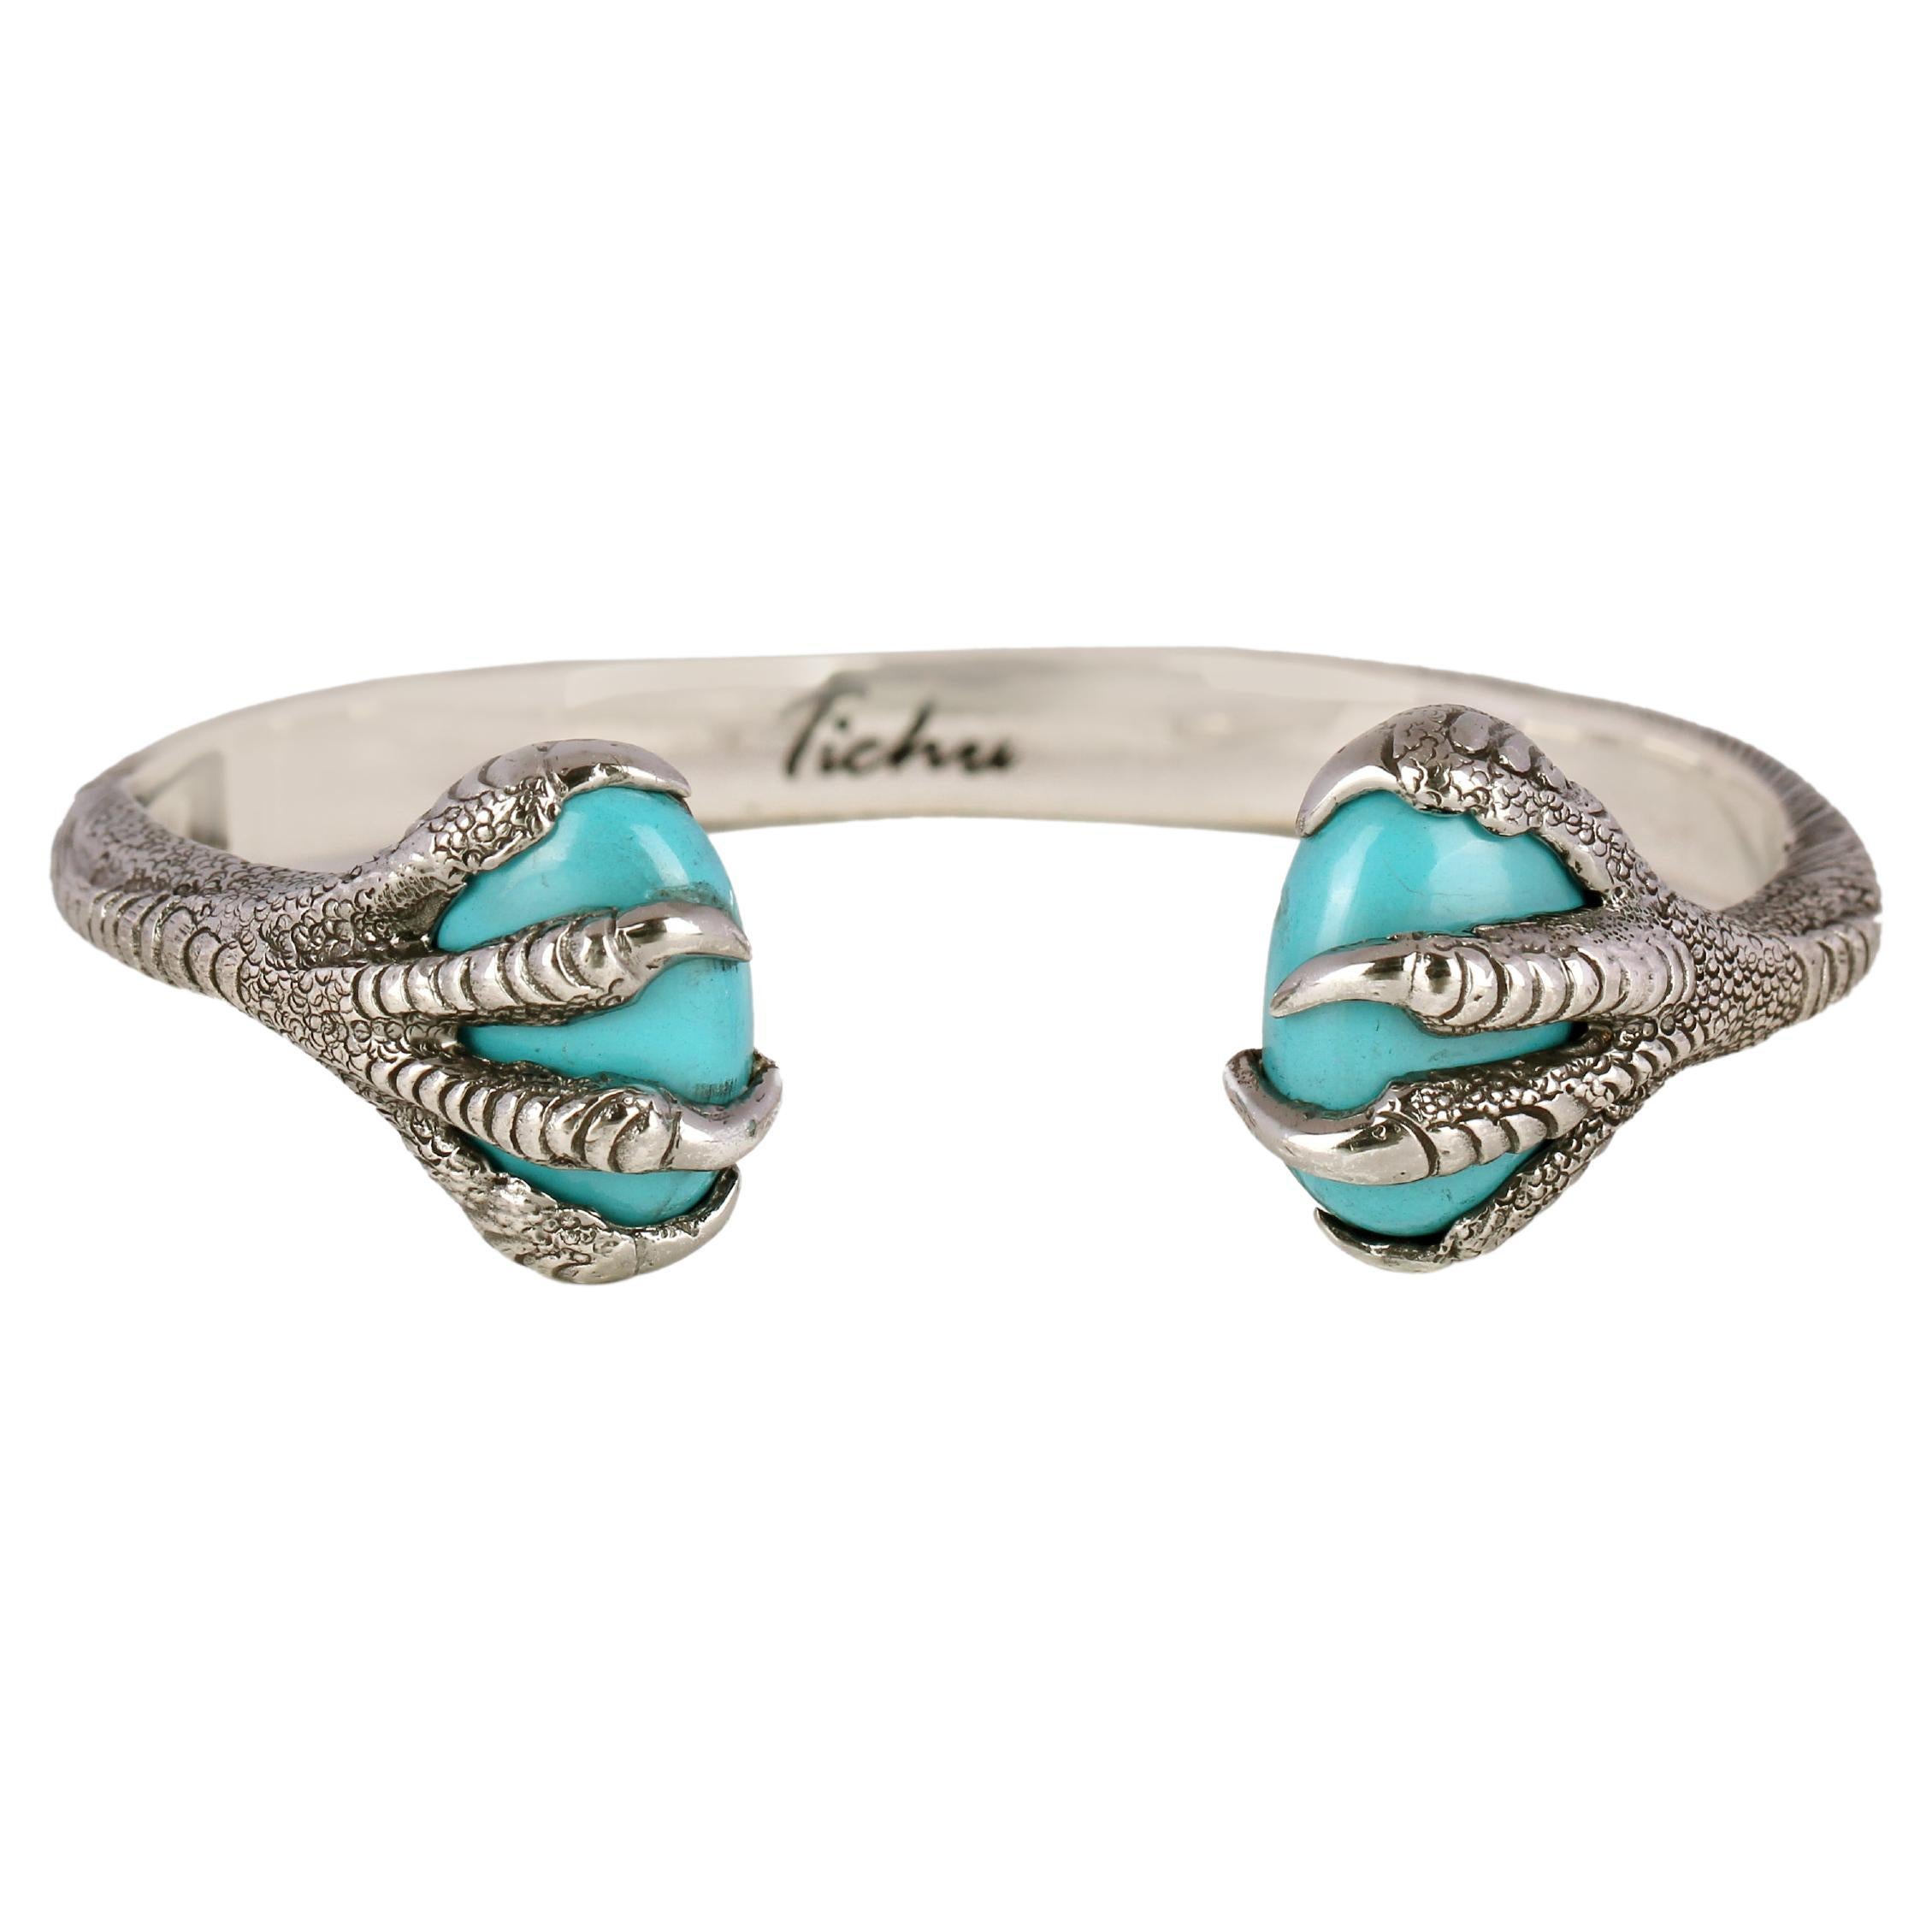 Tichu Turquoise Eagle Claw Cuff in Silver Sterling & Crystal Quartz, Size 'S'